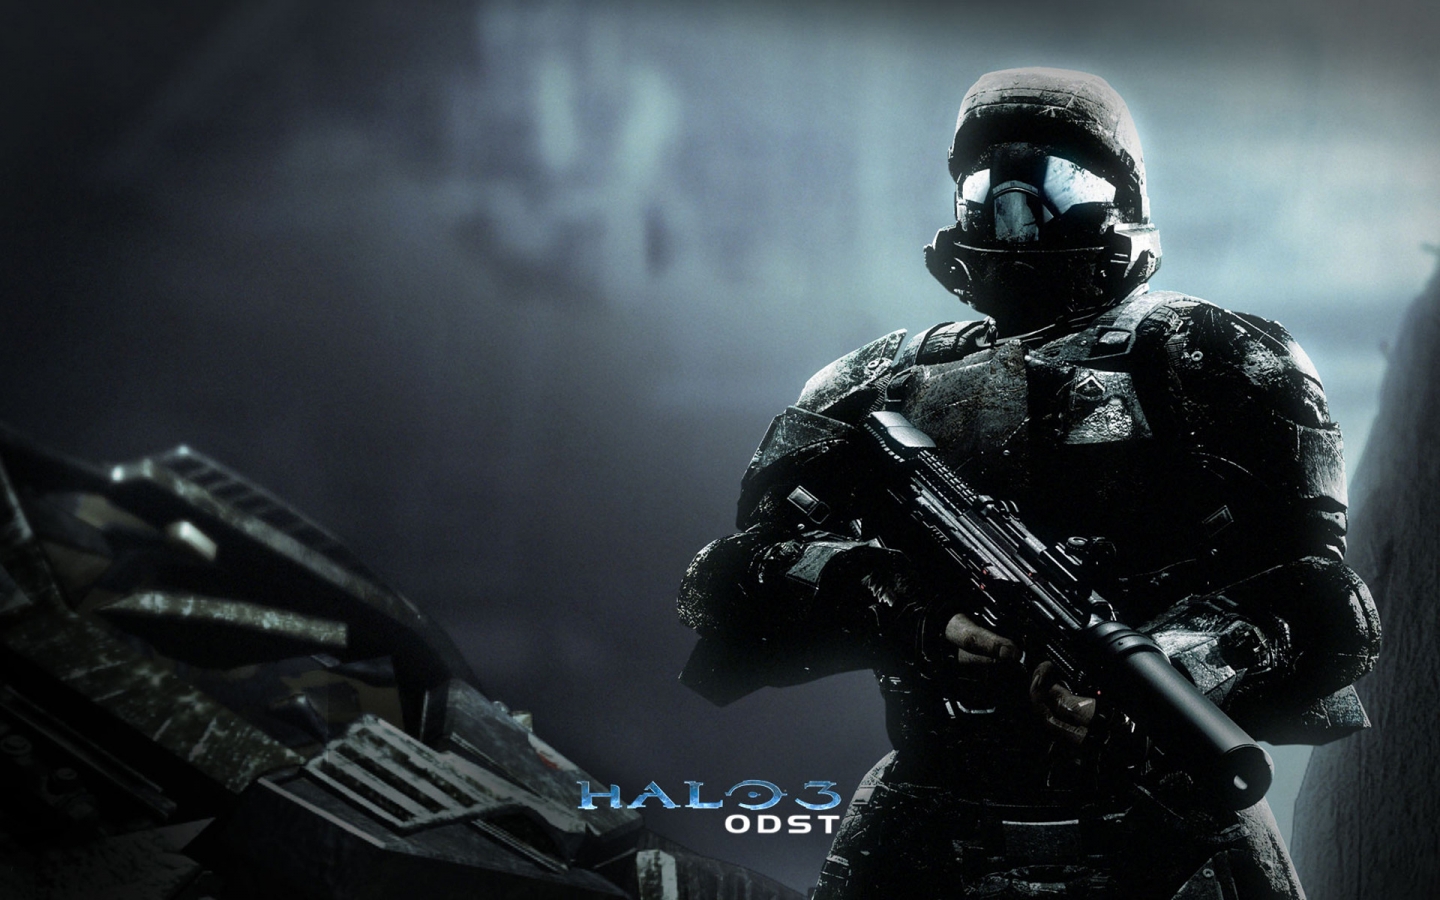 Halo 3 ODST for 1440 x 900 widescreen resolution